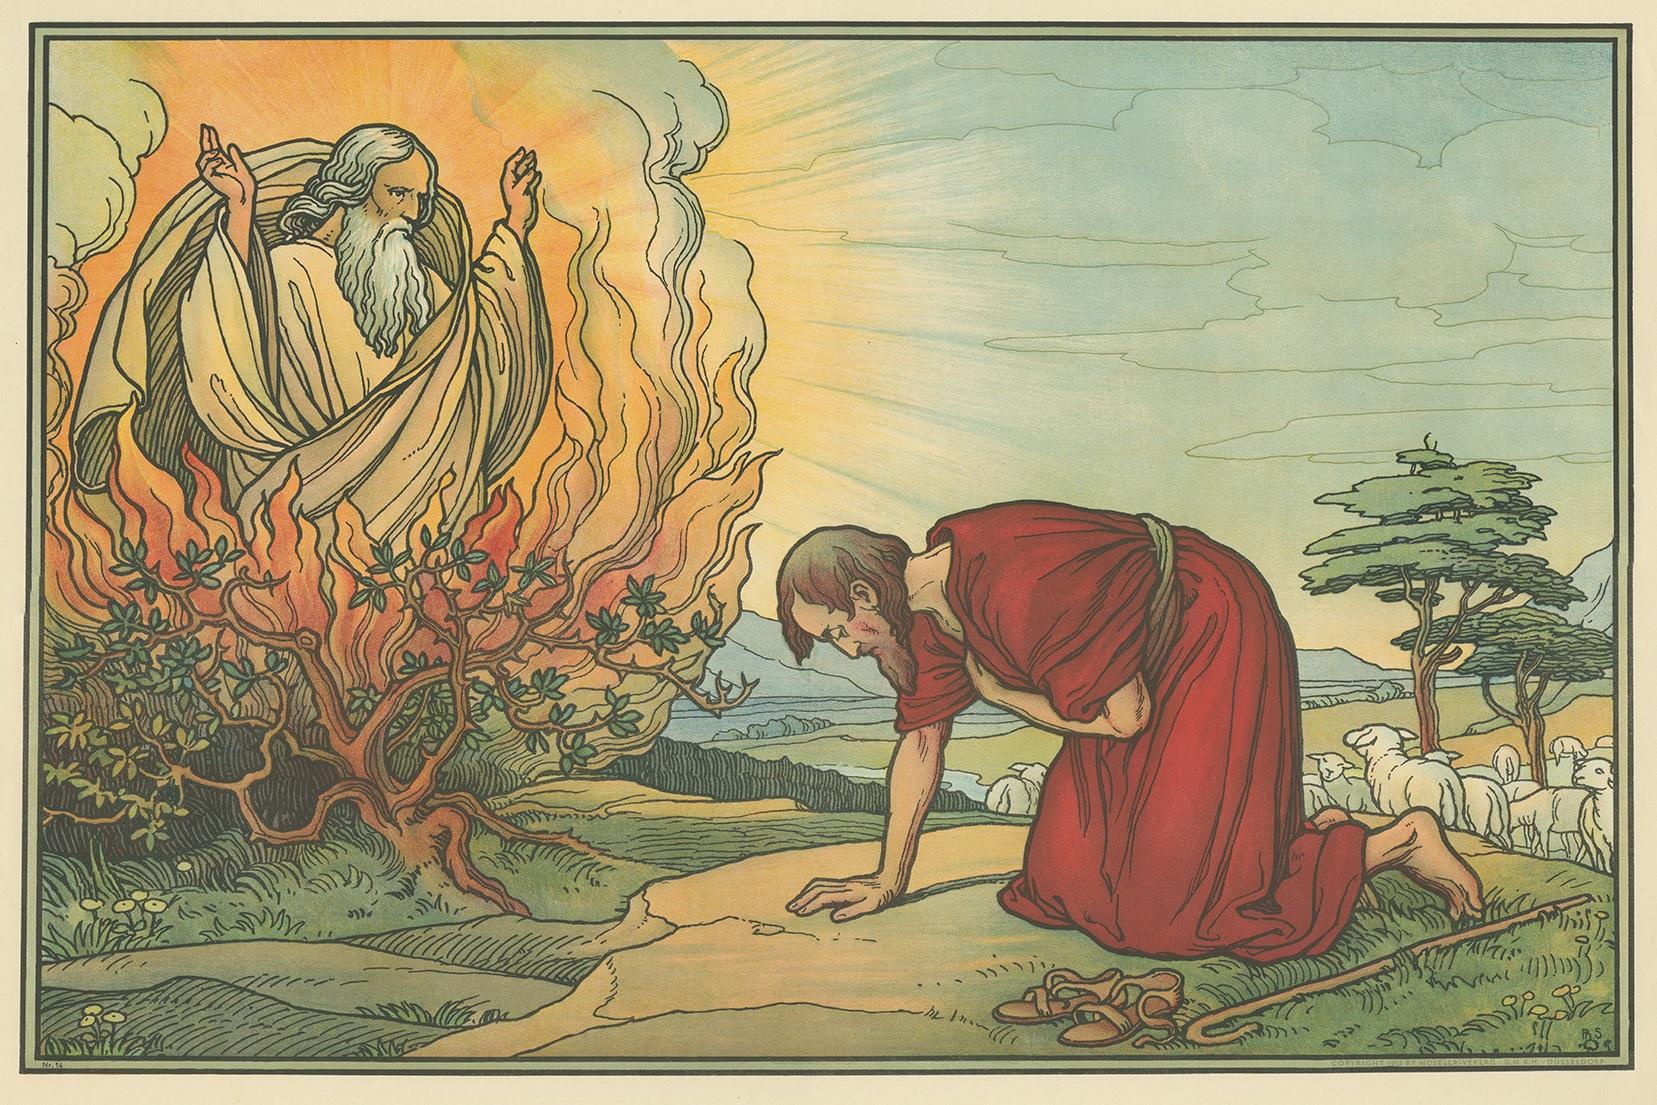 Large antique print of Moses and the Burning Bush. Published by Mosella-Verlag, 1913. This print originates from a series titled 'Kathol. Schulbibelwerk von Dr. Ecker'.